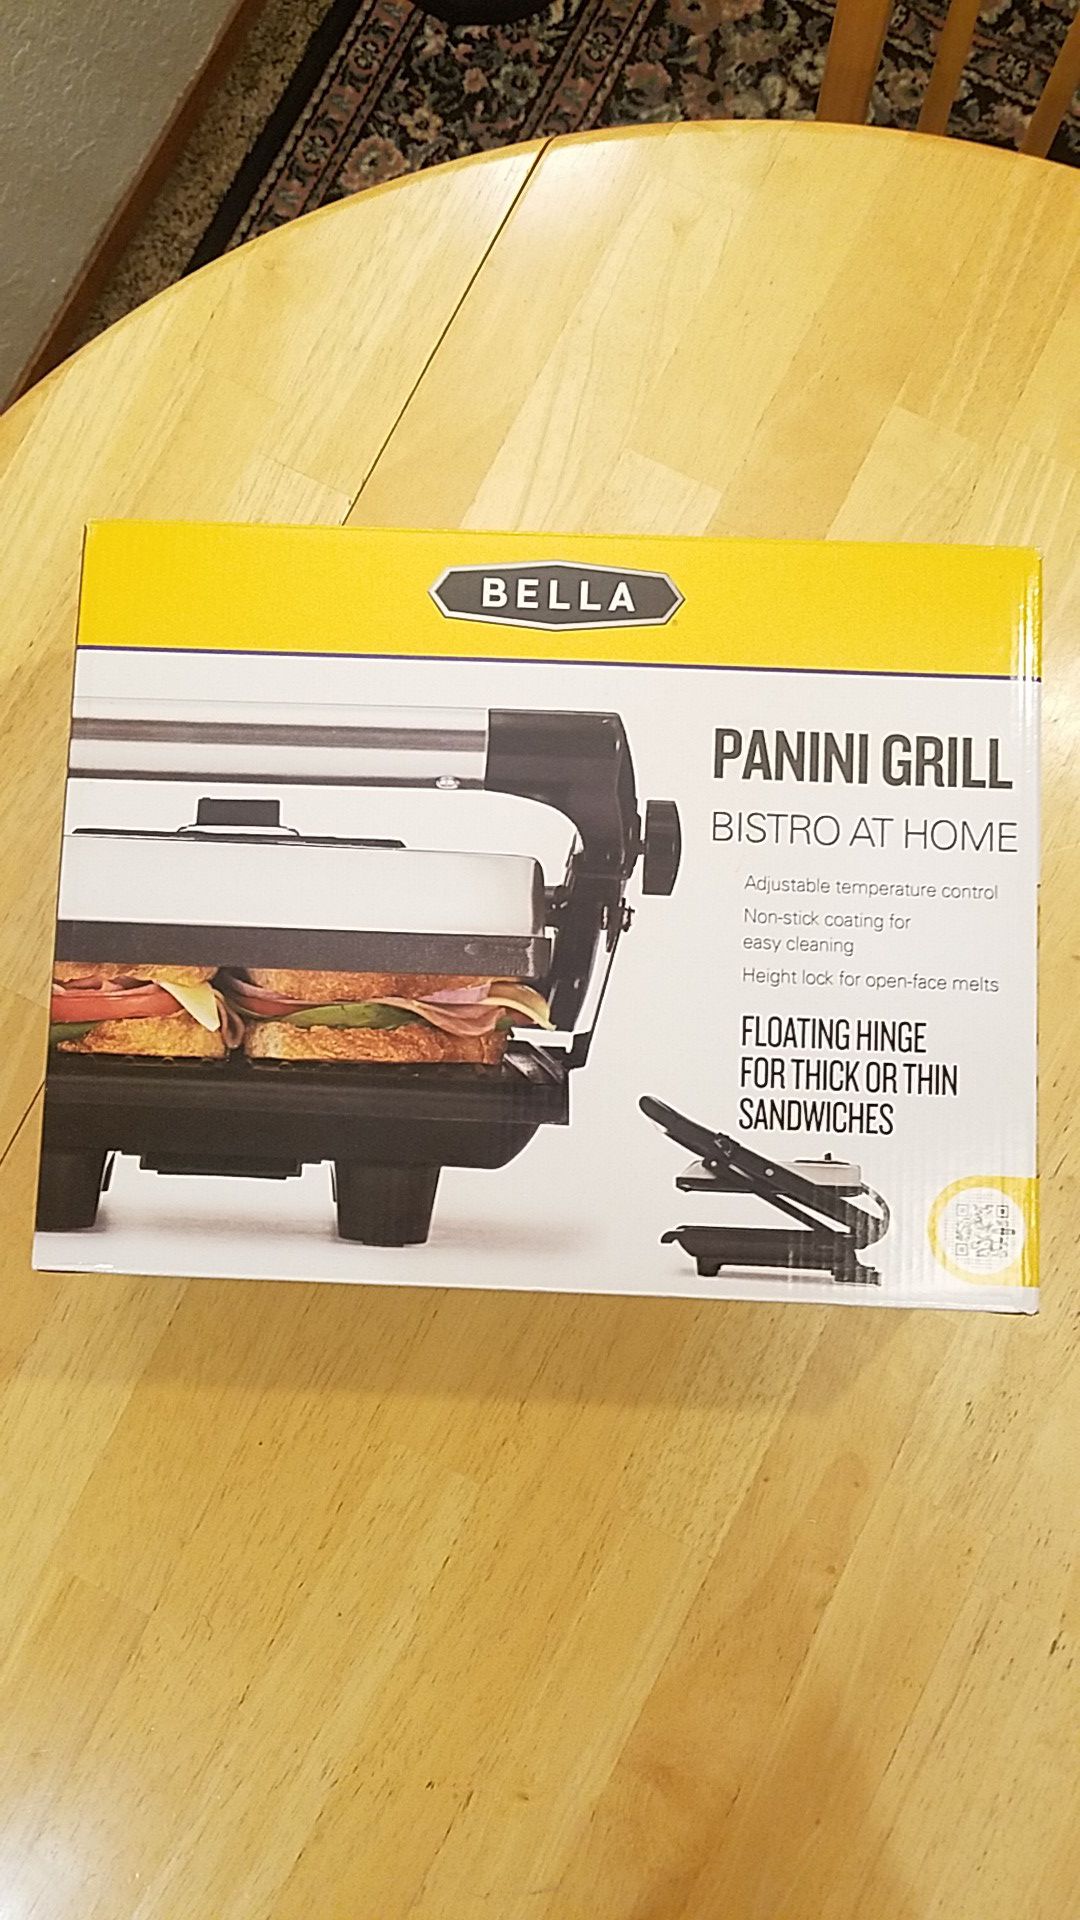 Grill press- great for paninis, grilled veggies, etc